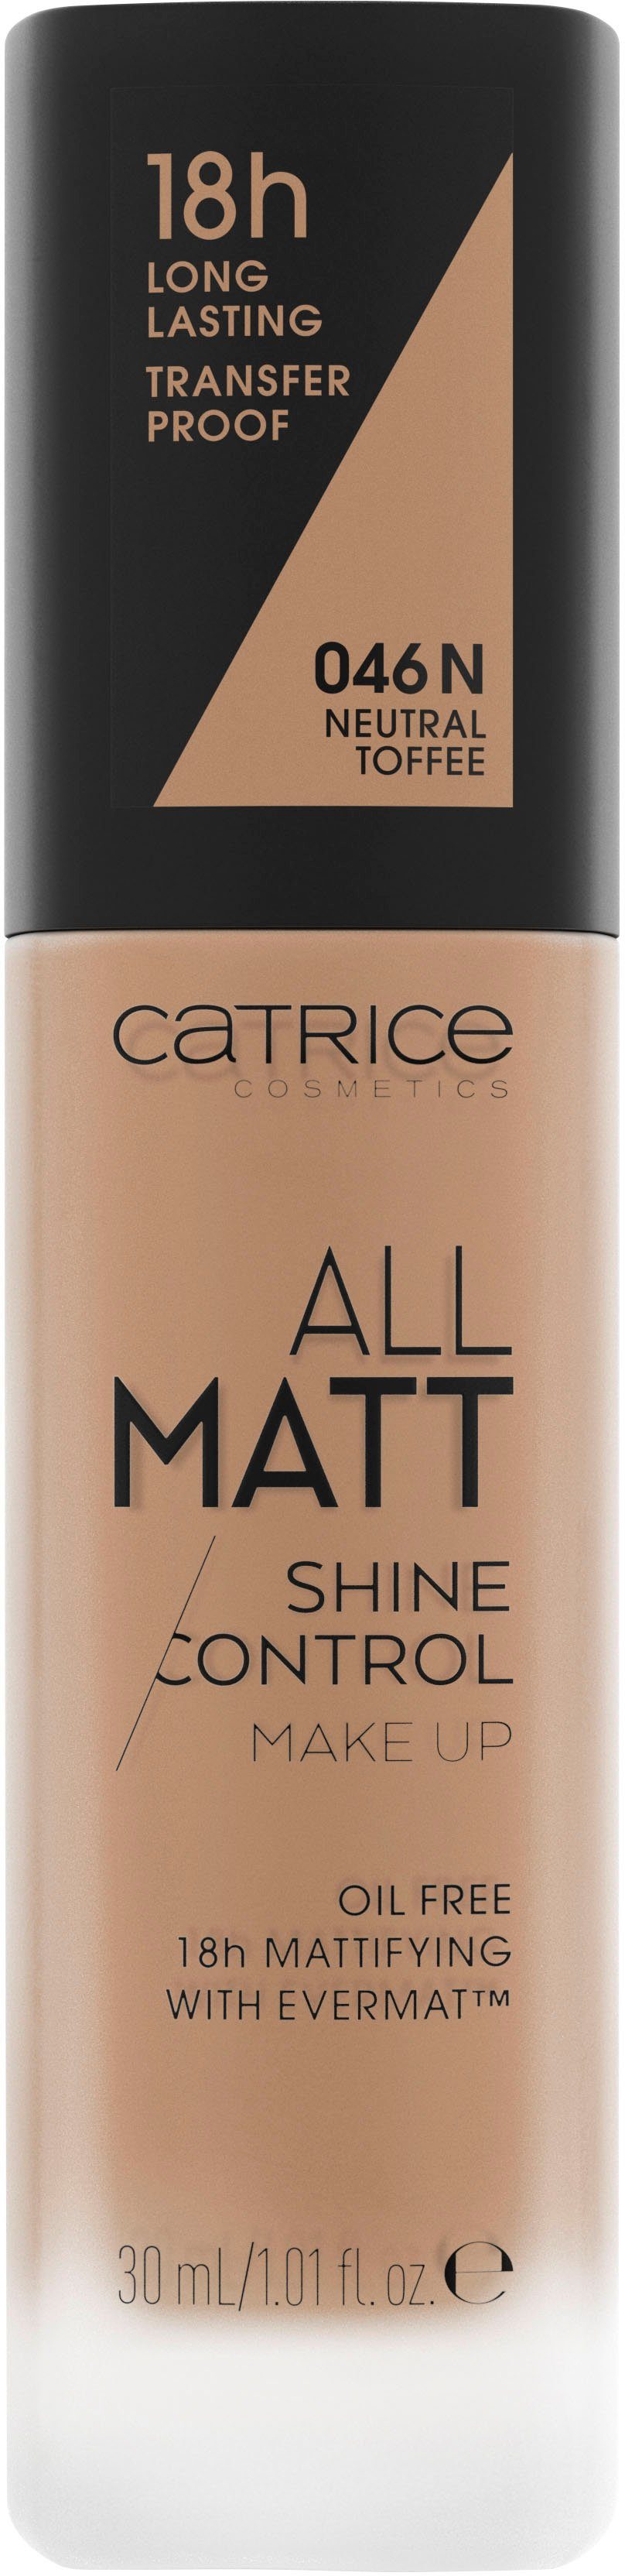 Catrice Foundation All Matt Neutral Toffee Control Make Up Shine